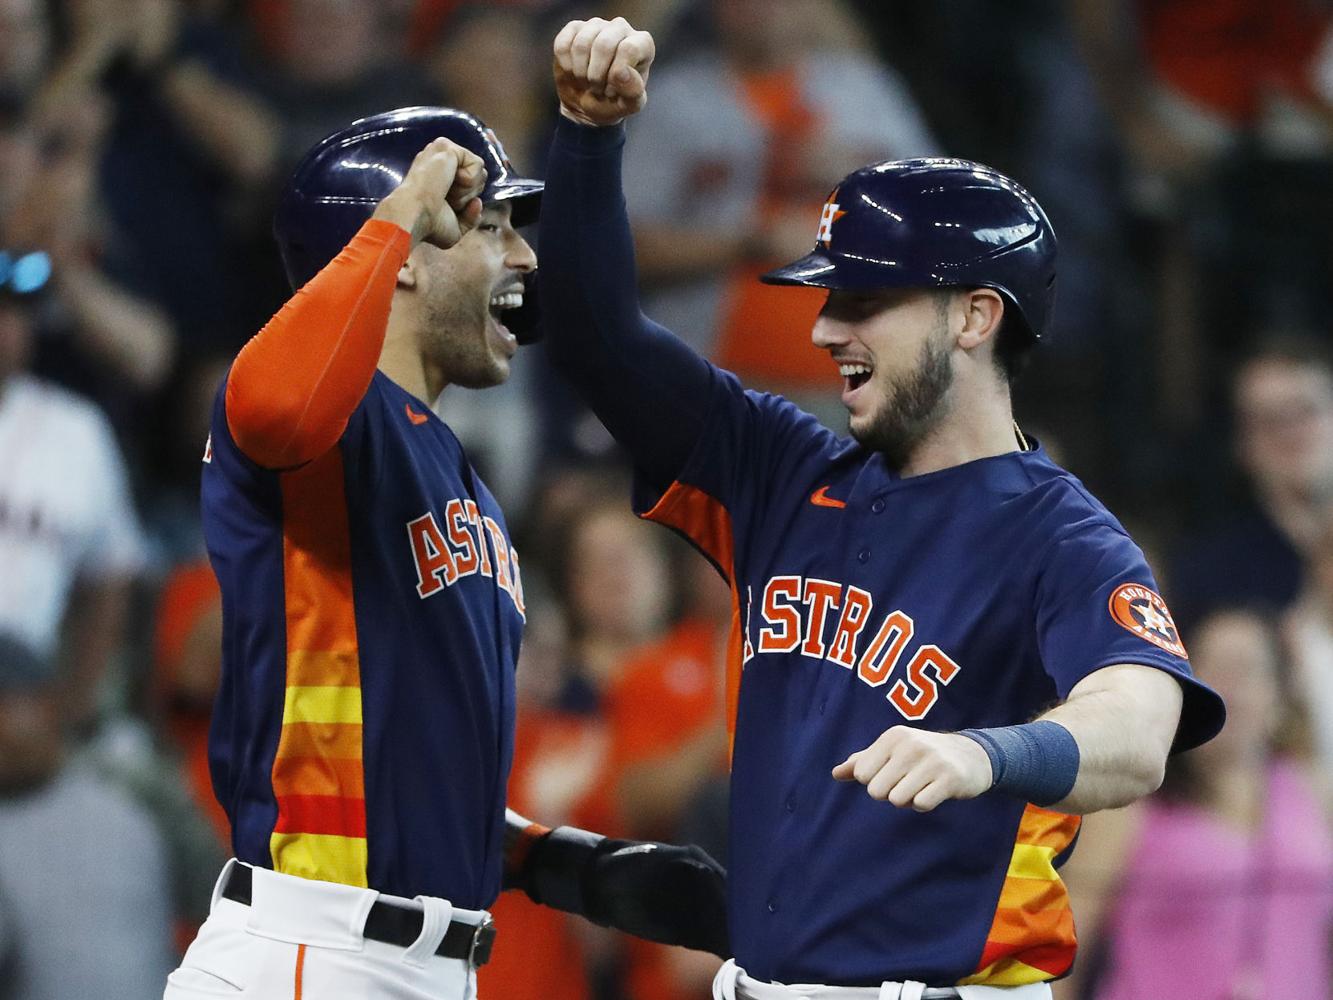 Houston Astros vs. San Diego Padres In Focus The Daily News